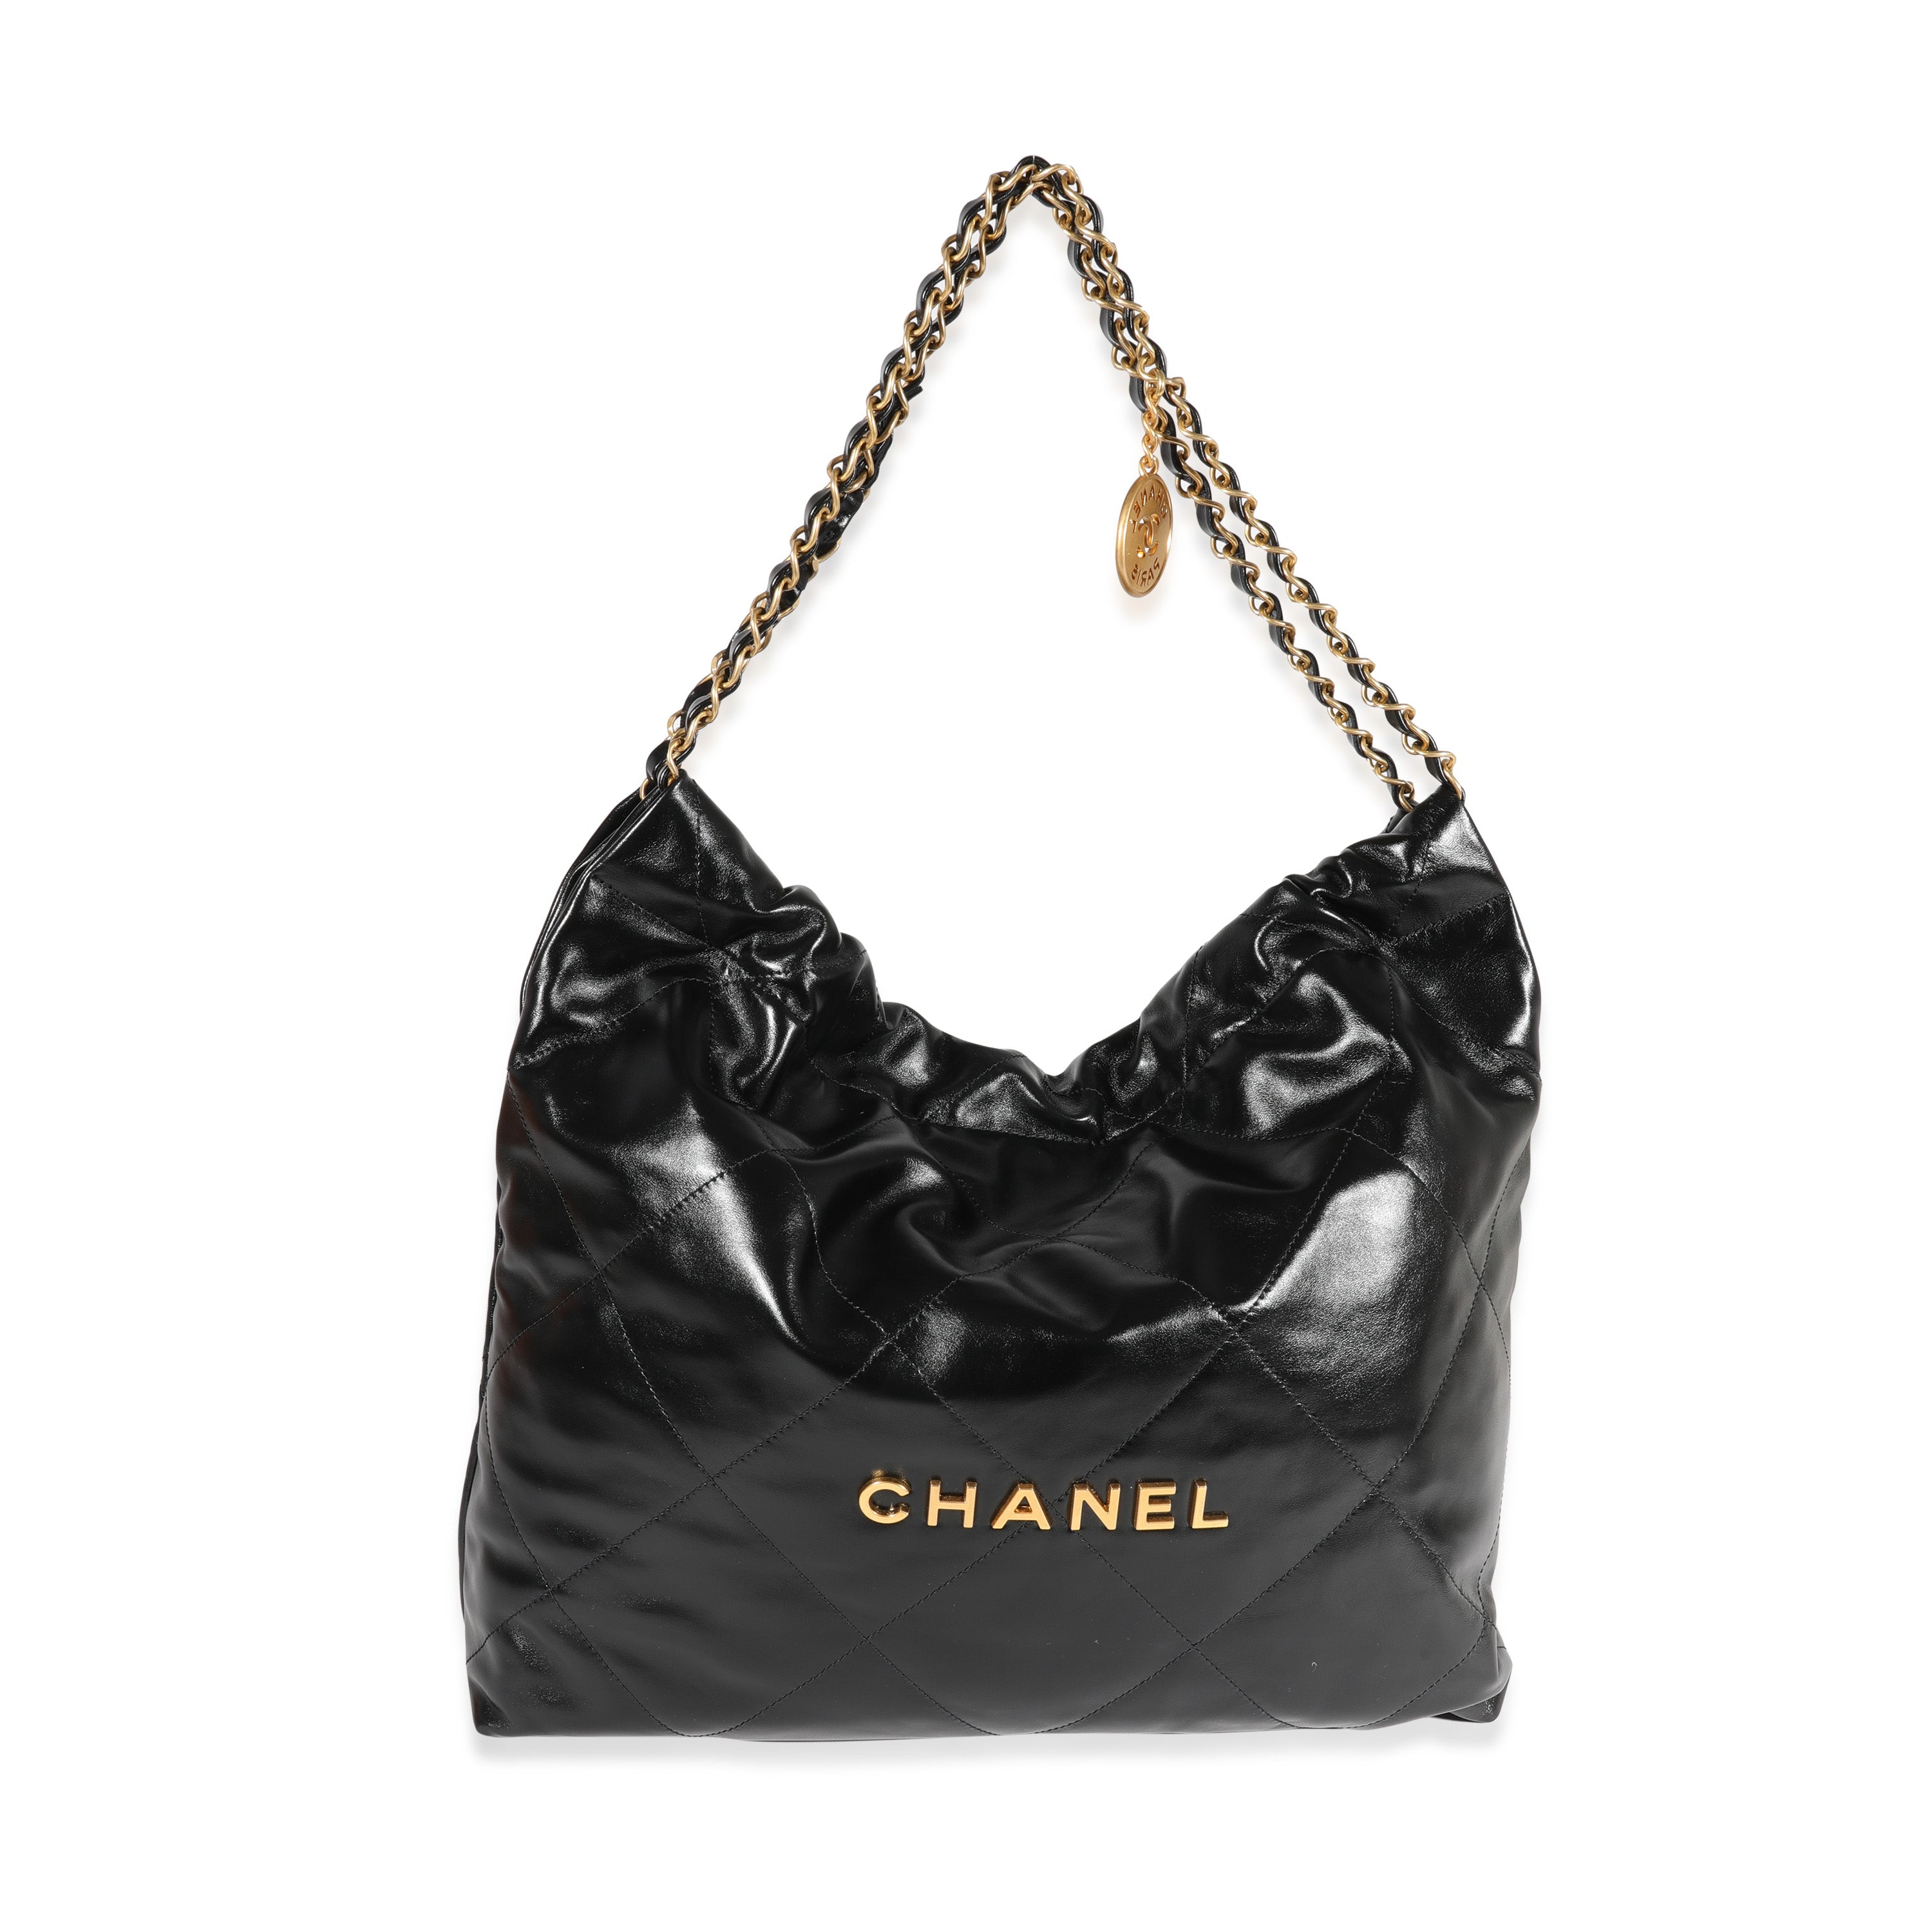 Chanel Black Quilted Shiny Calfskin Small Chanel 22 Bag, myGemma